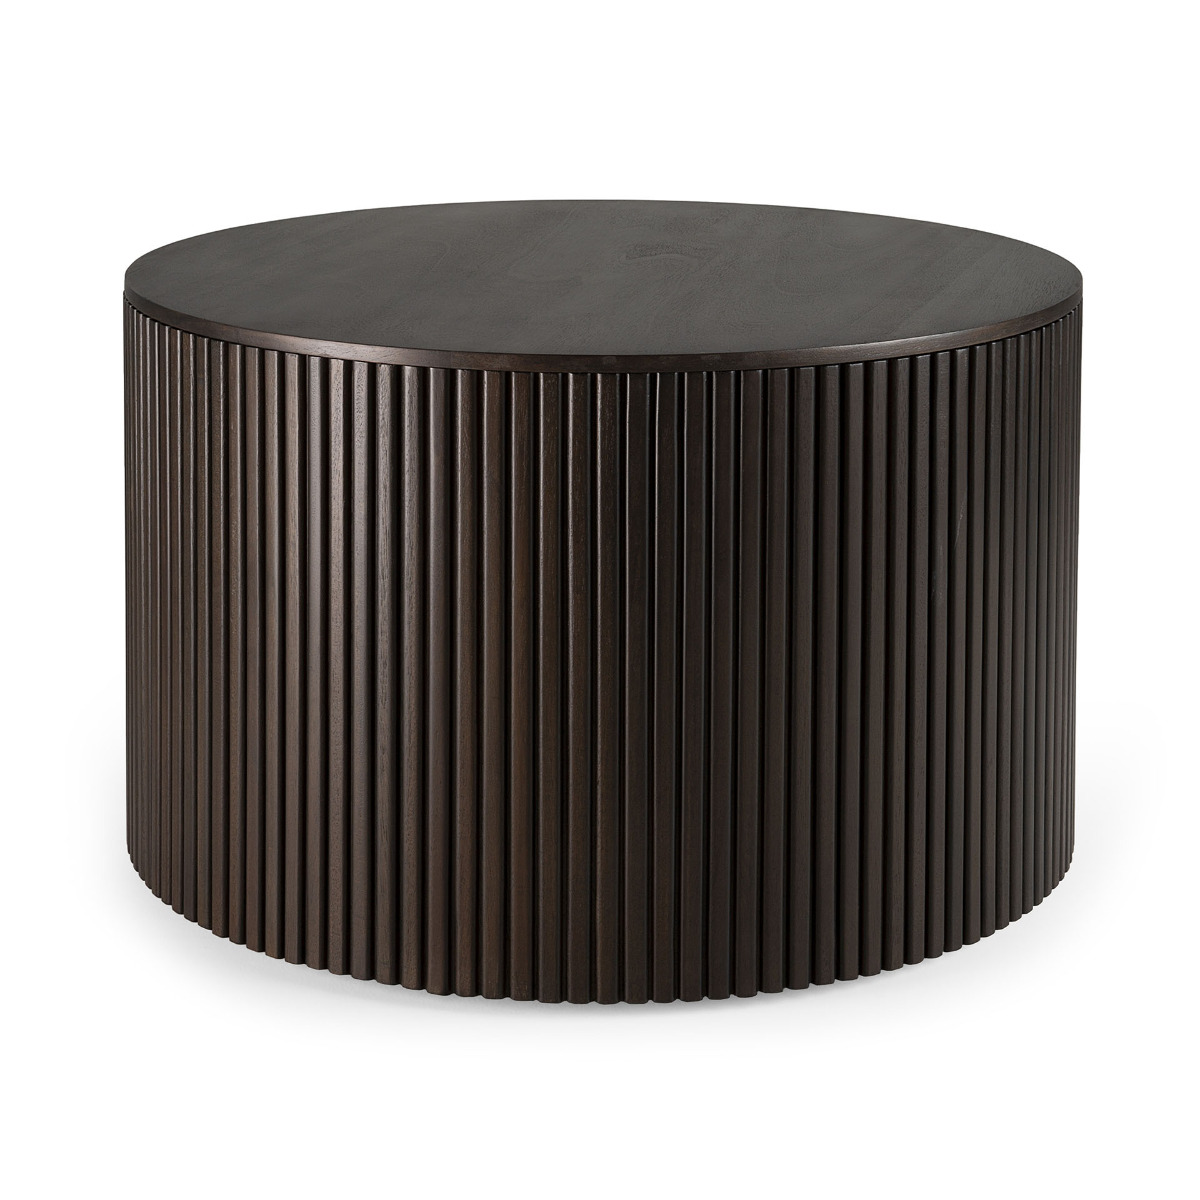 Roller Max dark brown round coffee table 60cm